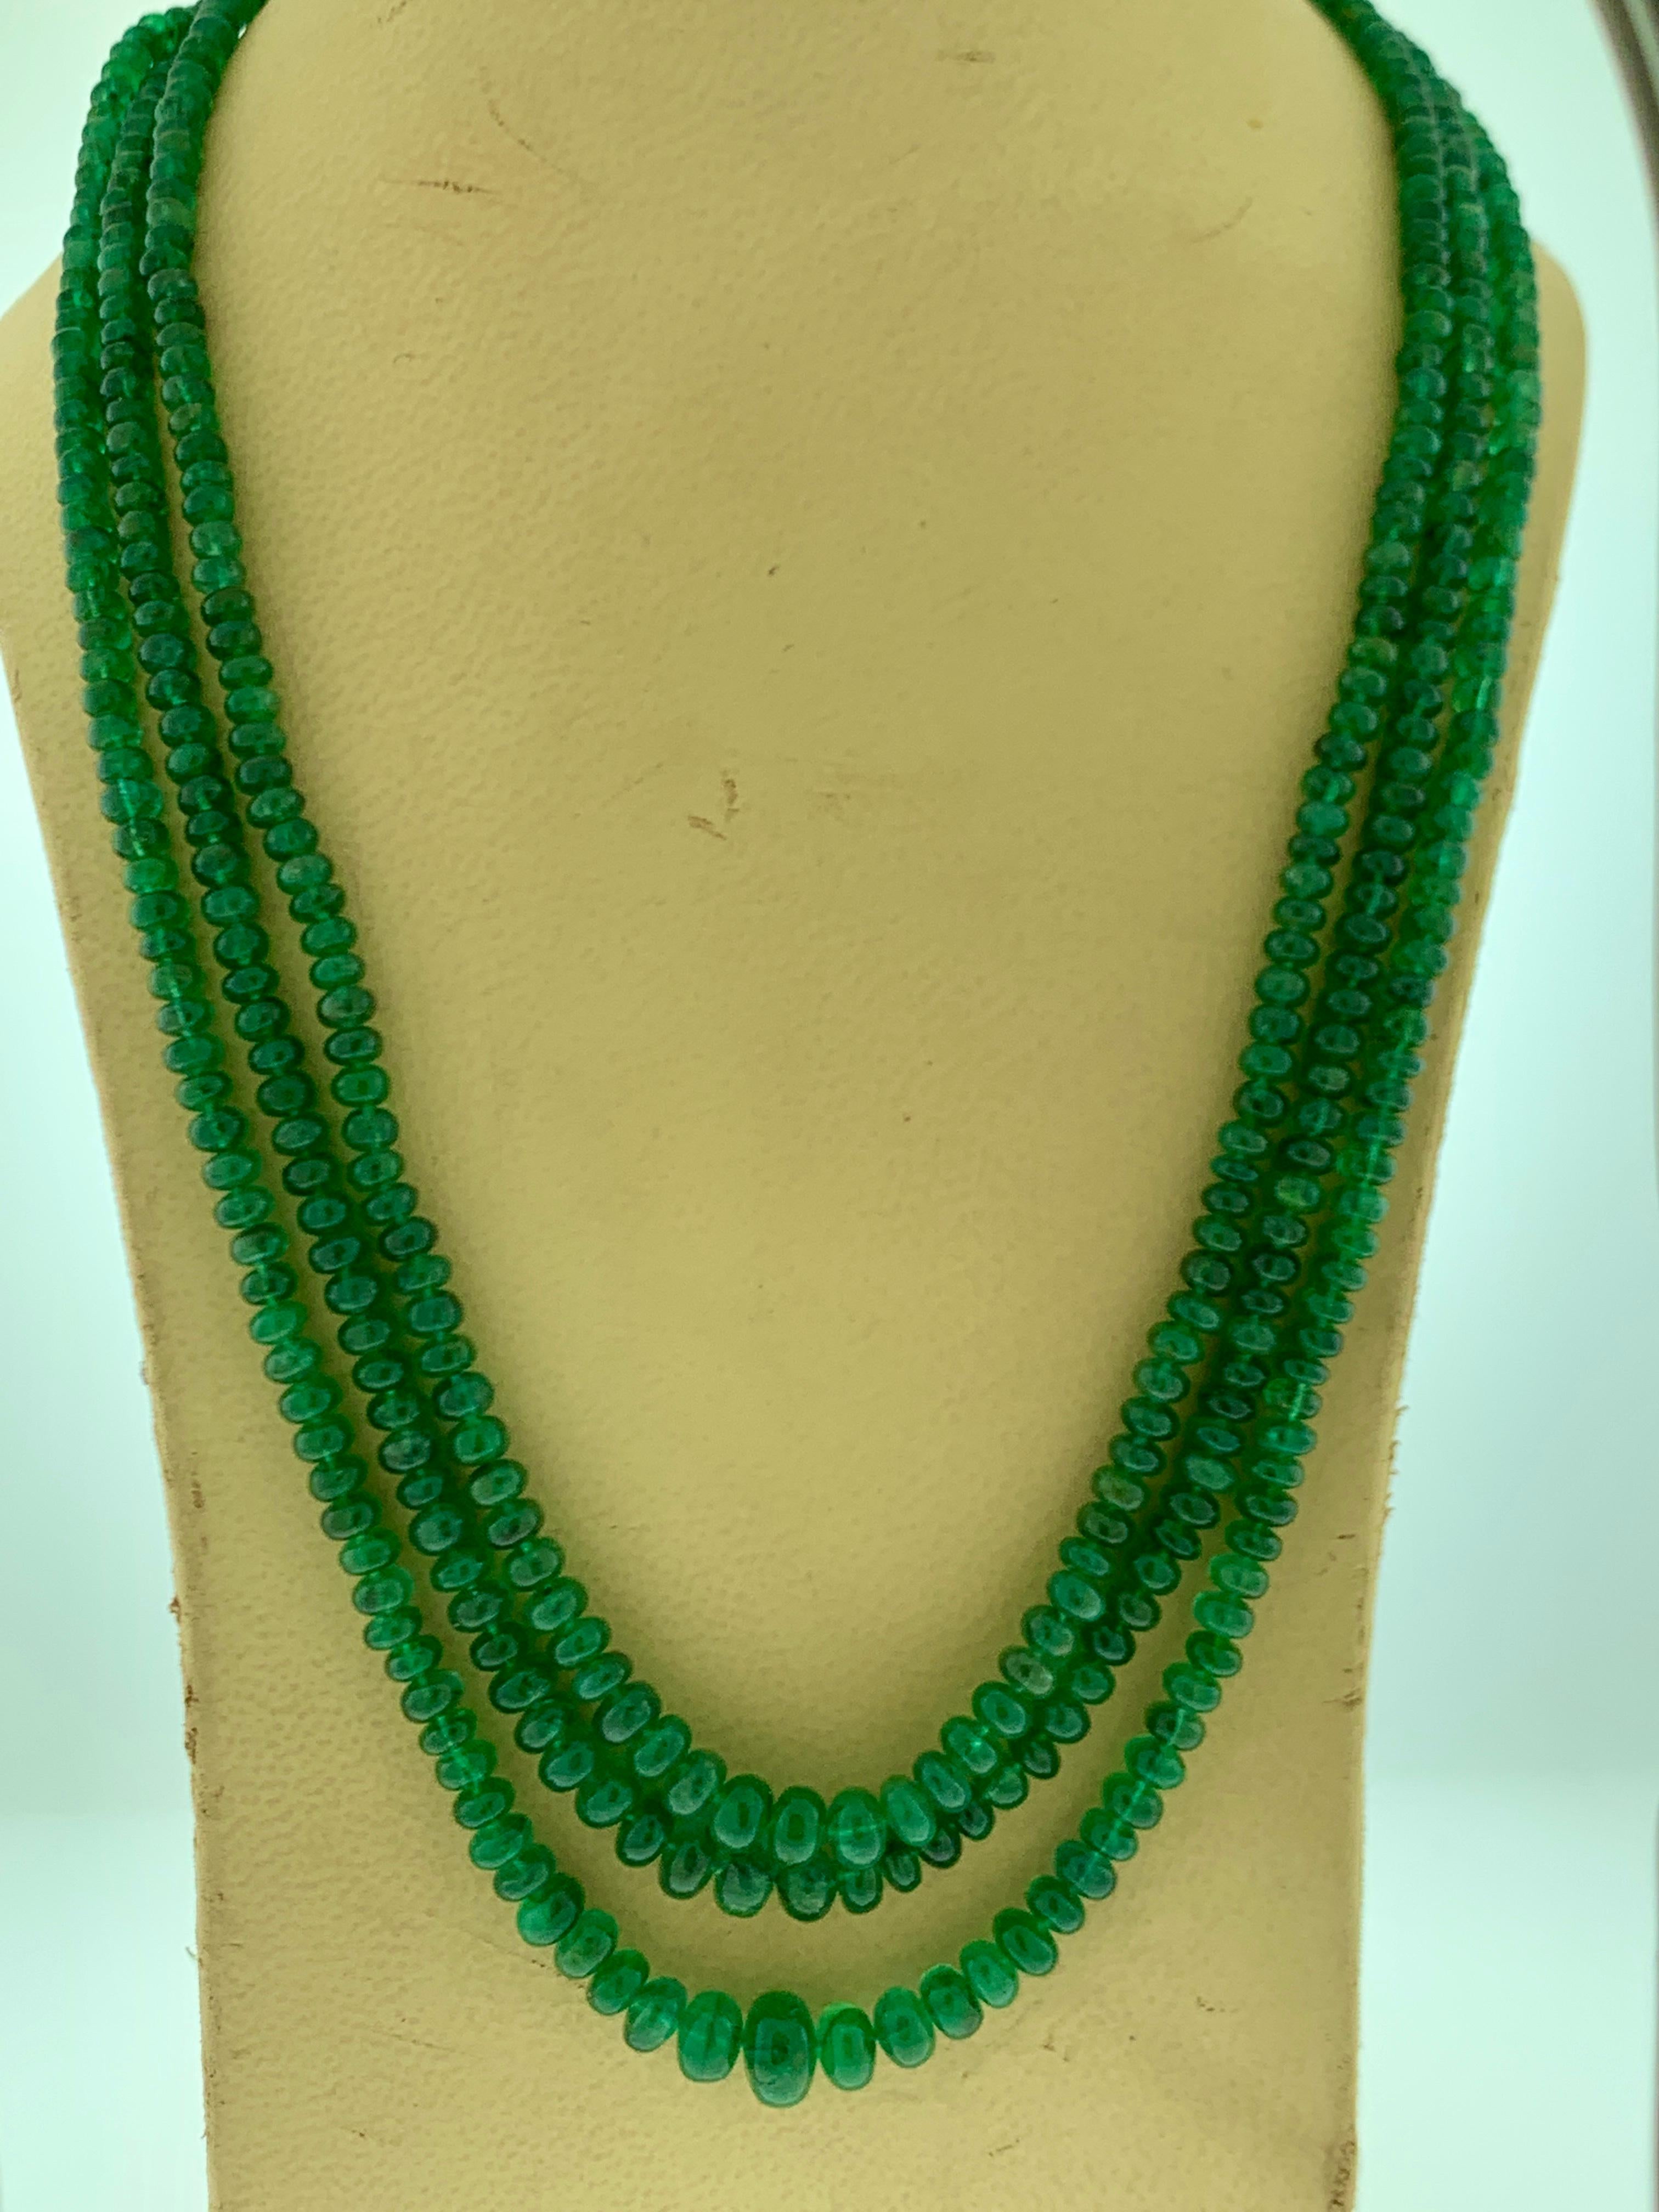 155 Carats 3 Layer Brazilian Emerald Bead Necklace Sterling Silver Clasp
This spectacular Necklace consisting of approximately 155 Ct of Fine Emerald Beads .
A magnificent emerald bead necklace featuring a large number of Graduating emerald beads.